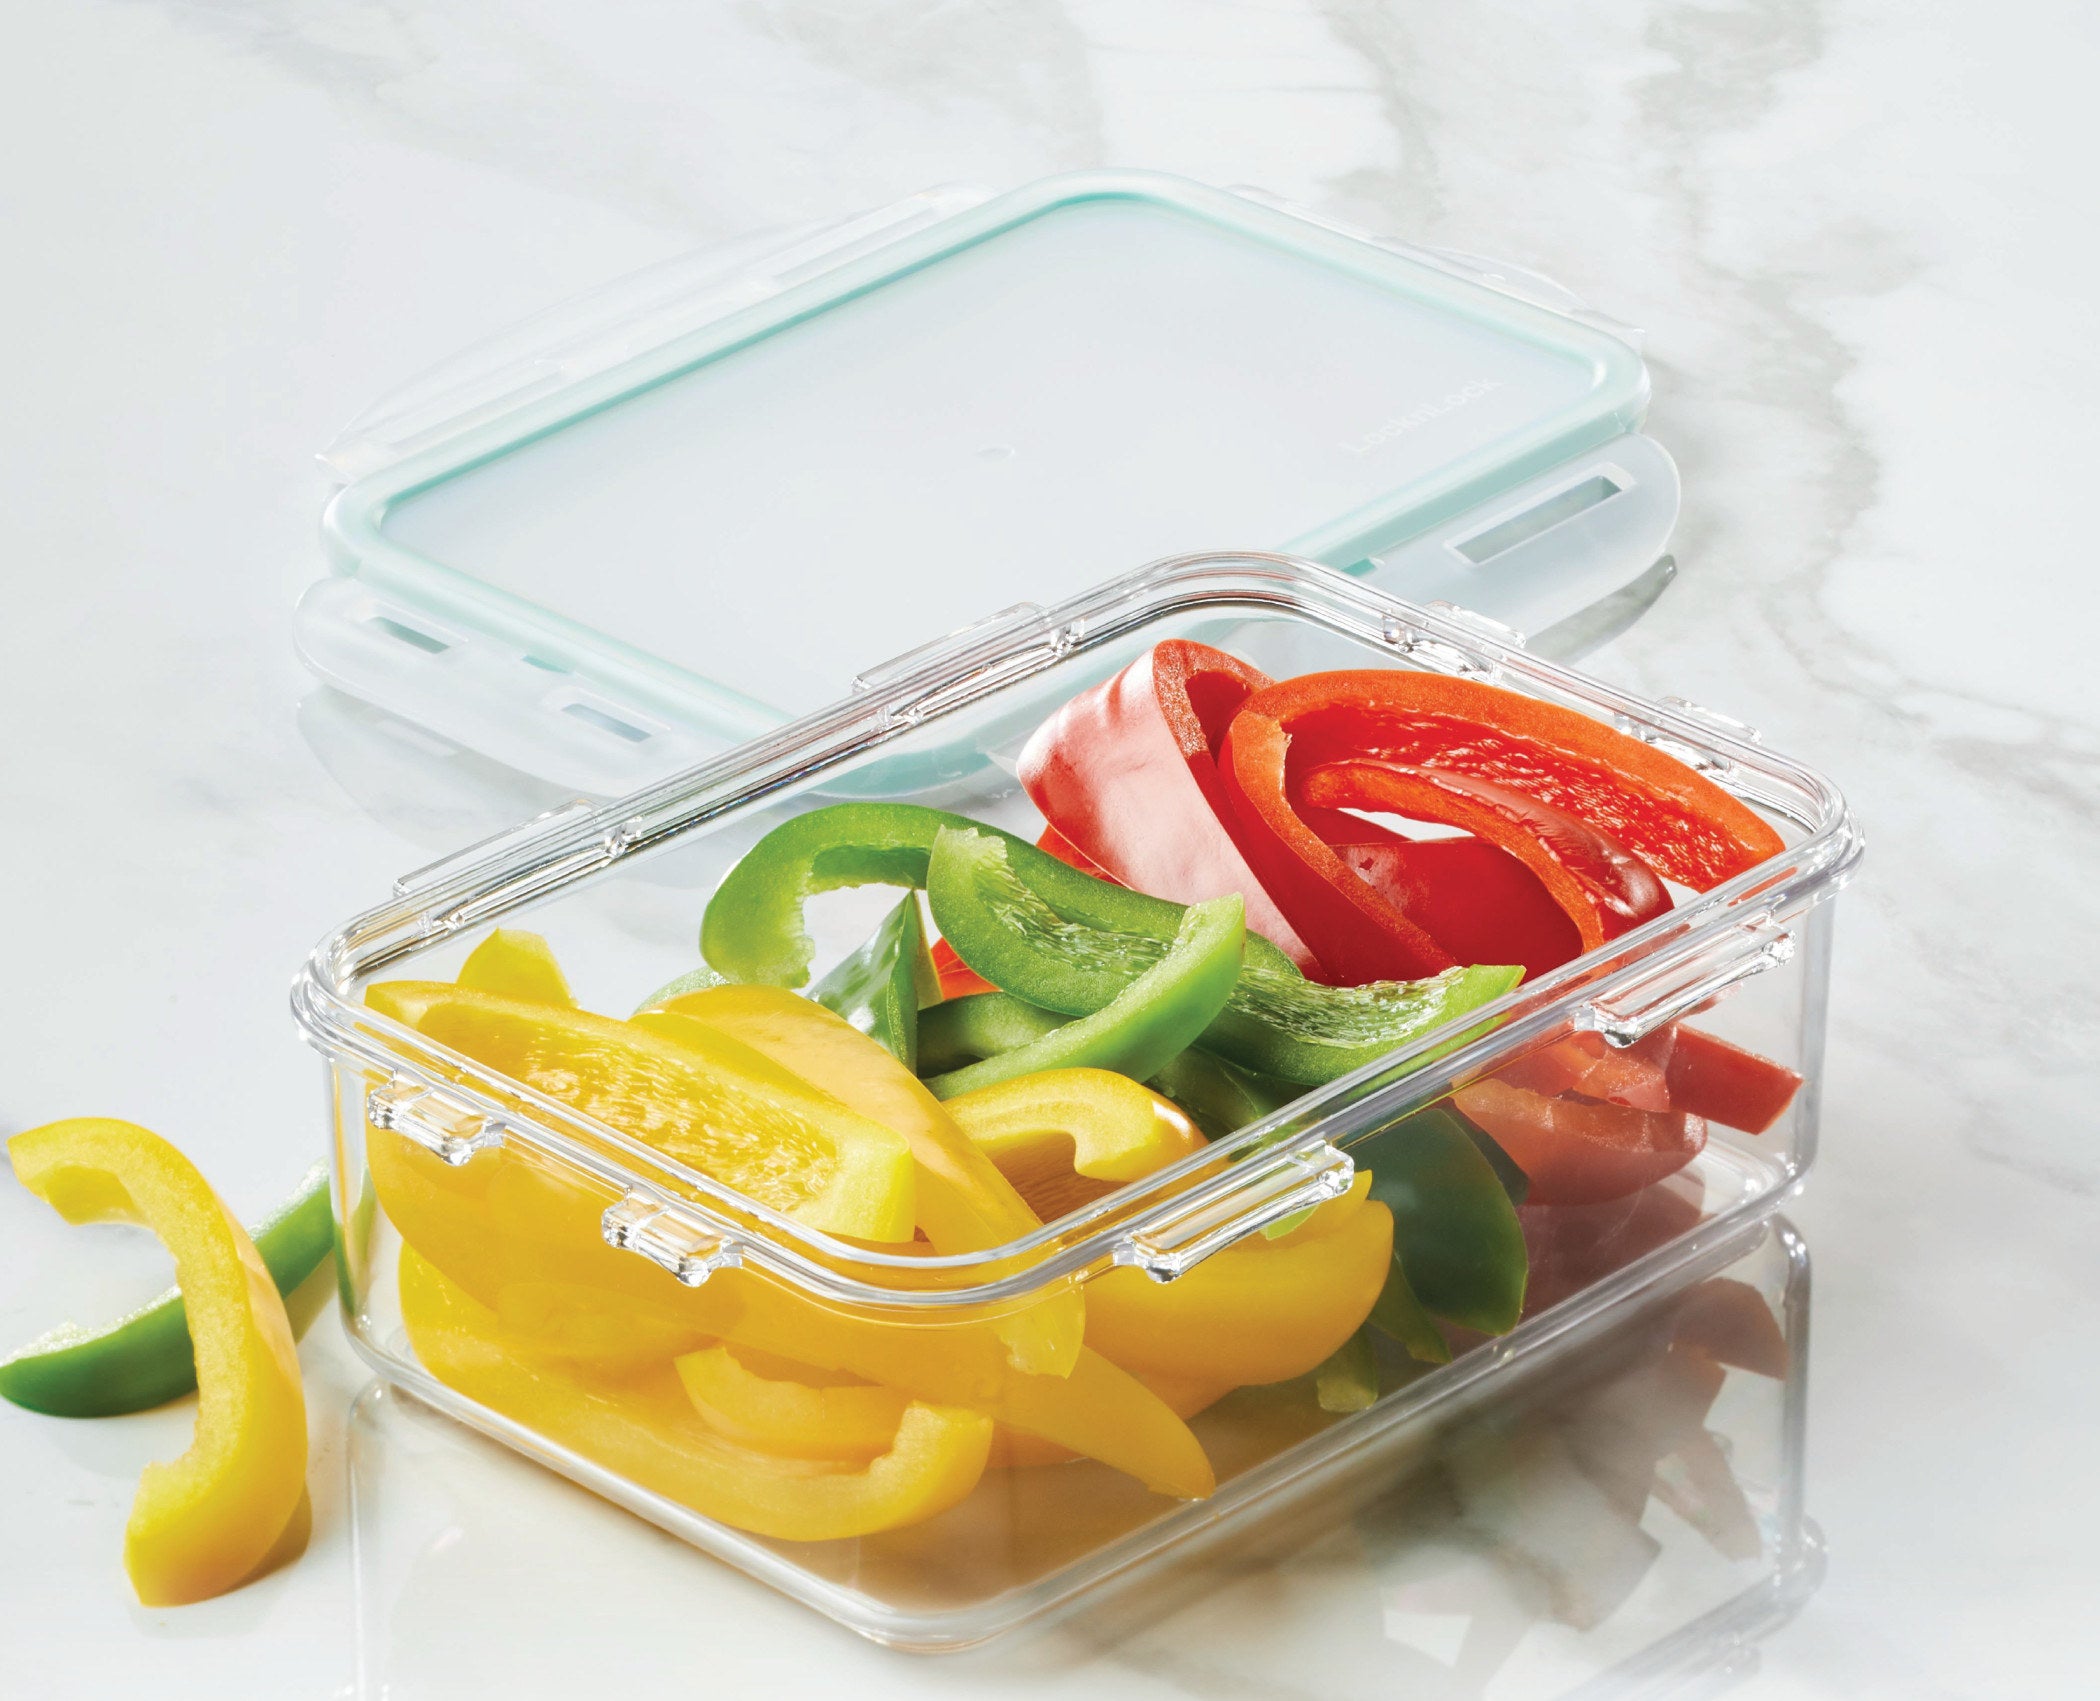 The rectangular food storage container